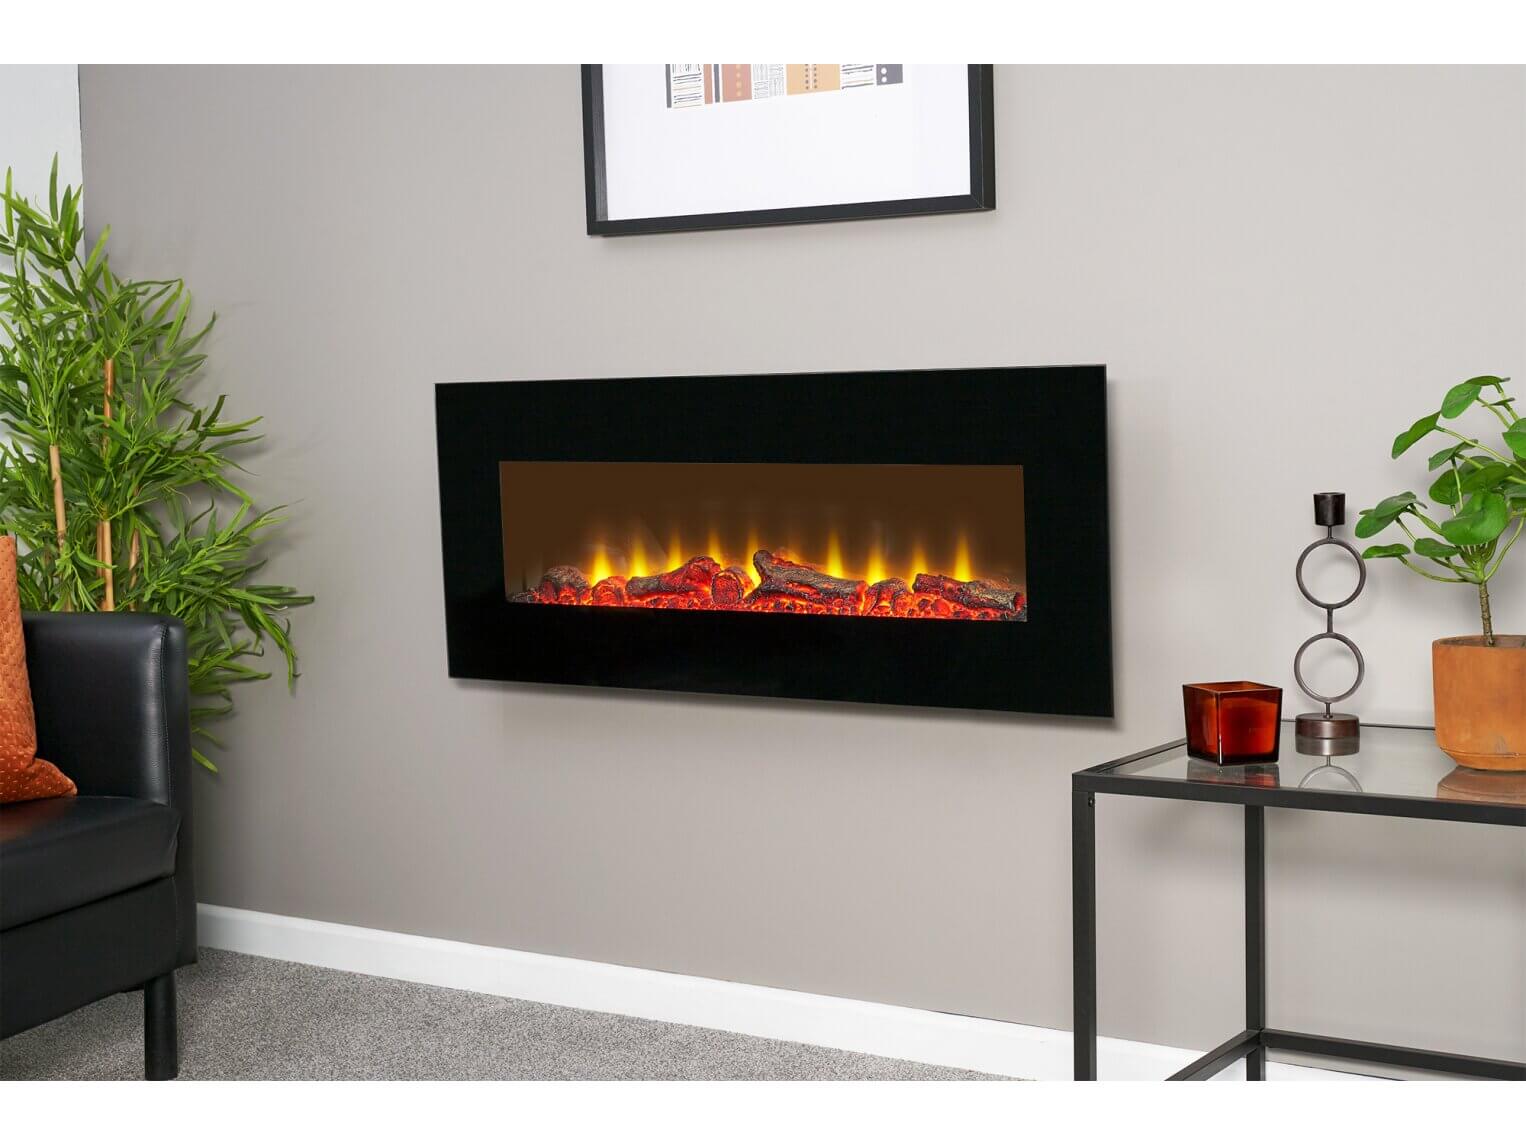 Sureflame WM-9331 Electric Wall Mounted Fire with Remote in Black, 42 Inch - Glowing Flames